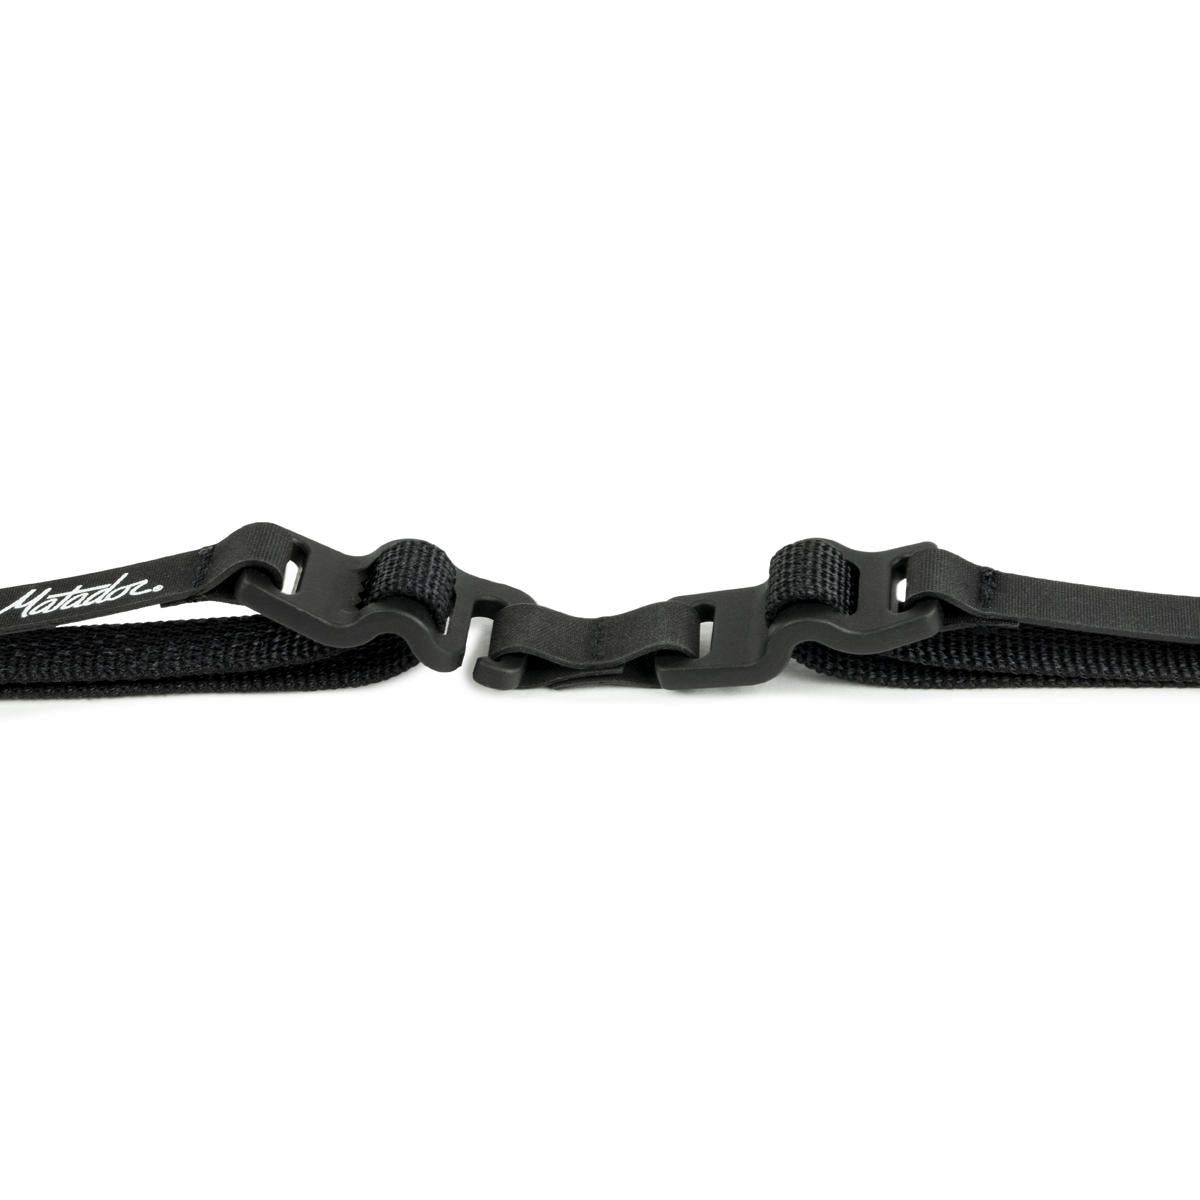 Matador(マタドール) Better Tether Gear Straps (2 Pack)